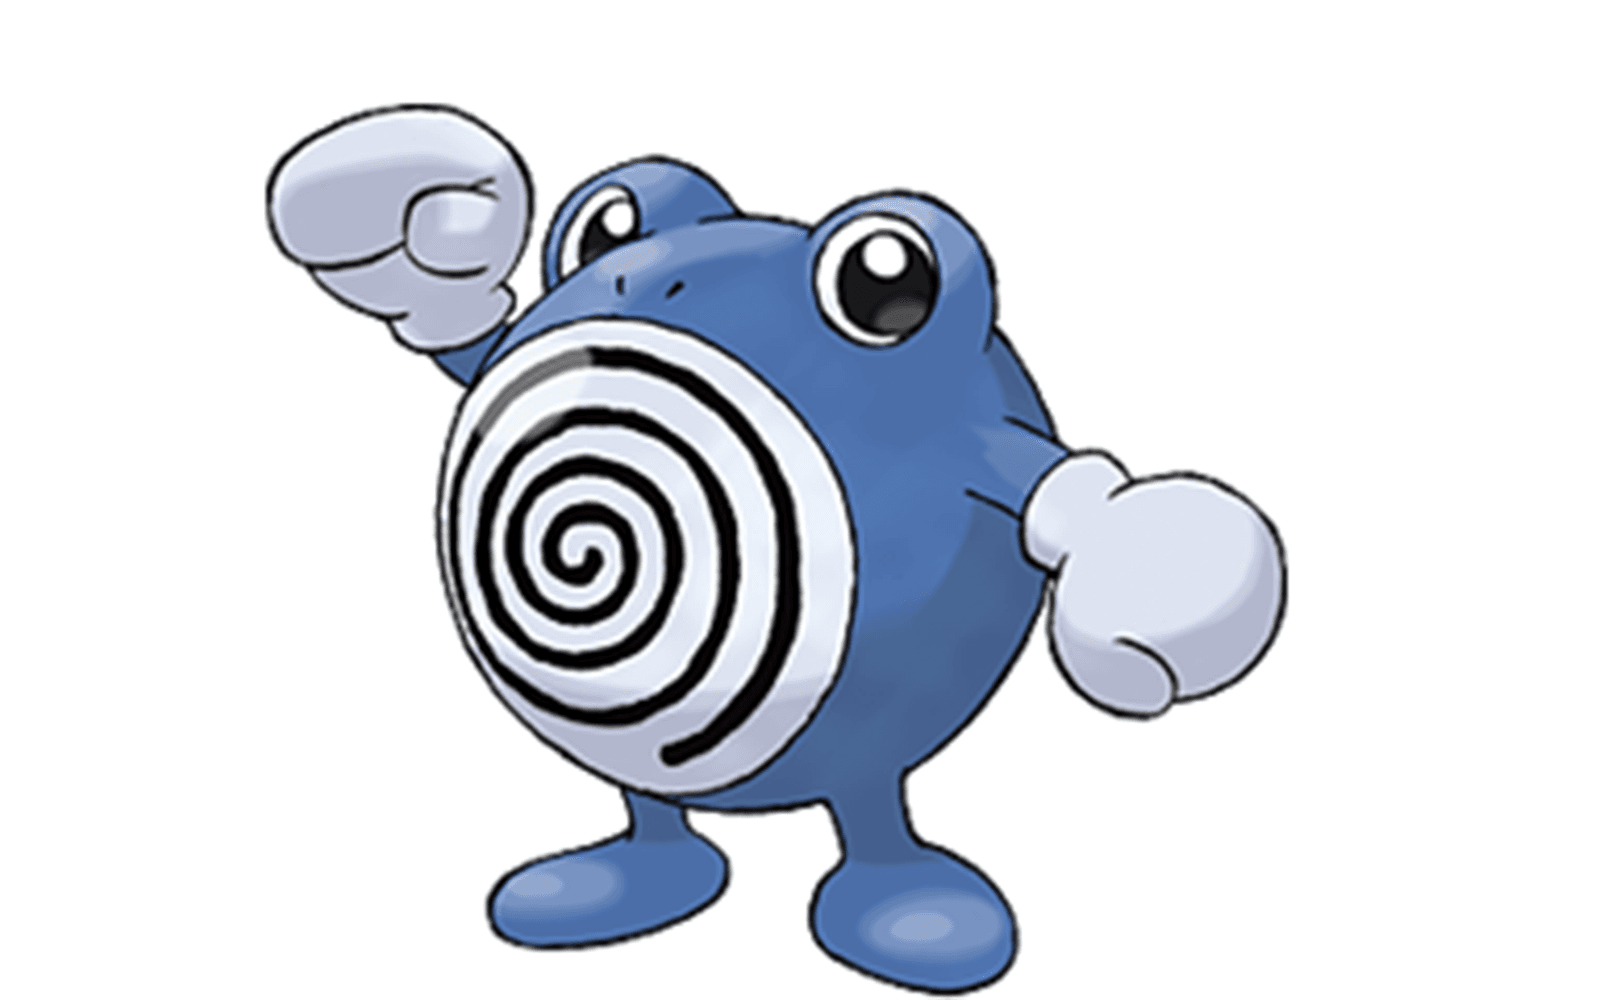 61. Poliwhirl